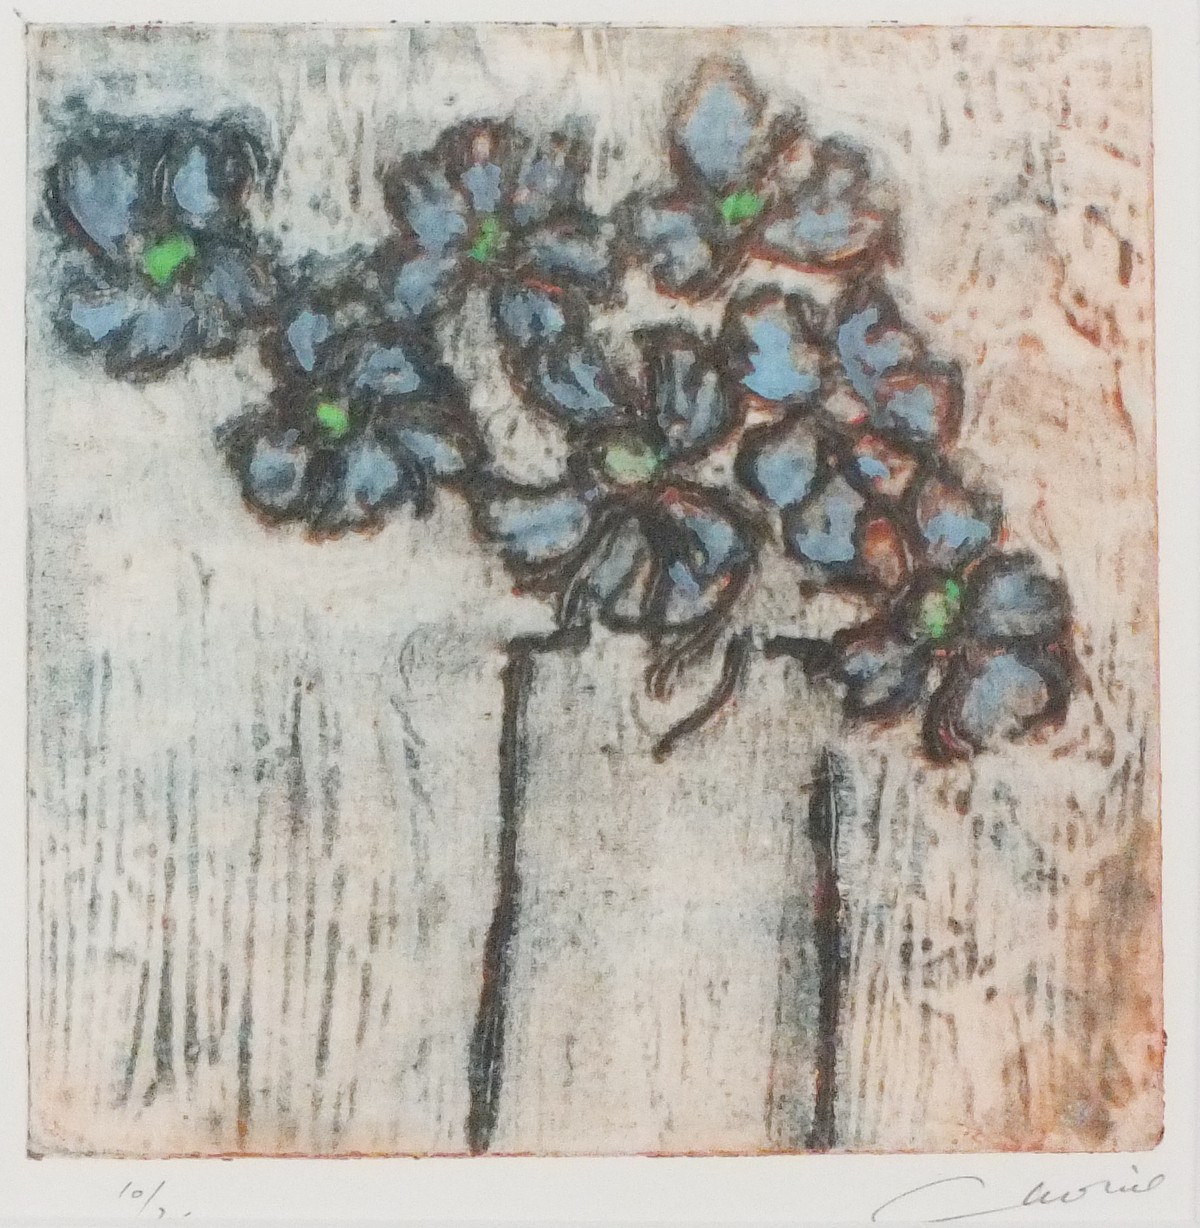 Ian LAURIE (British b. 1933) Forget-Me-Nots, Etching, Signed lower right, numbered 10/25?, 6.5" x